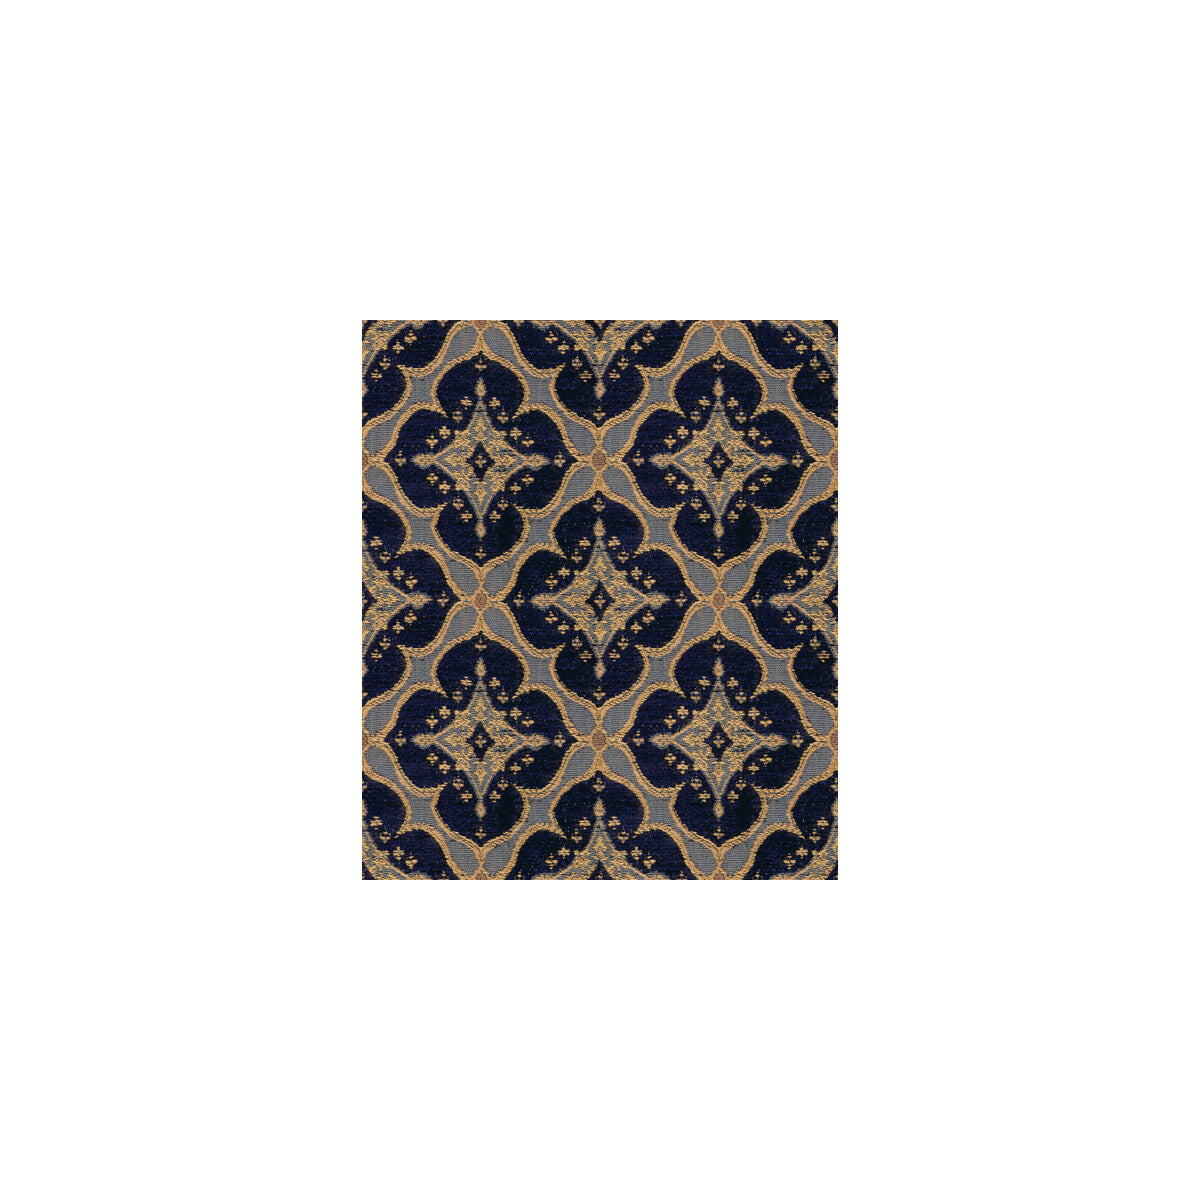 Ornament Accent fabric in indigo color - pattern 28828.450.0 - by Kravet Couture